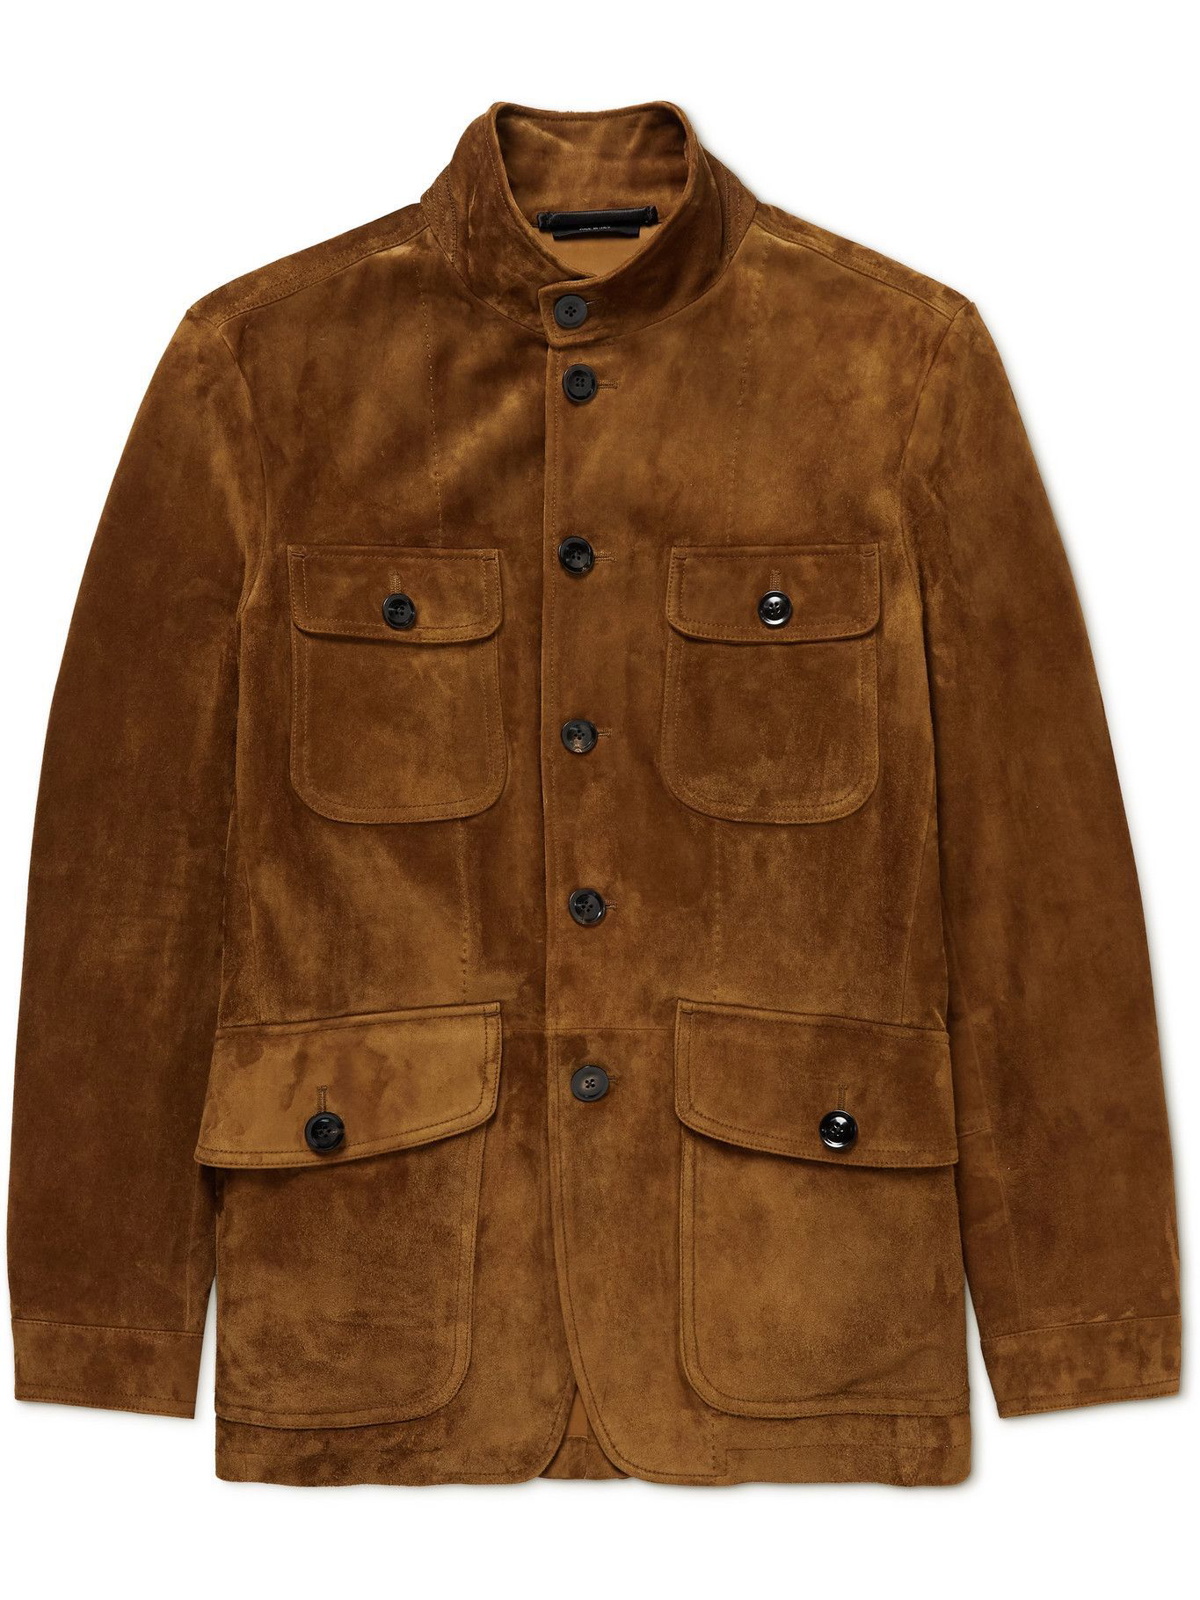 TOM FORD Men's Suede Military Jacket